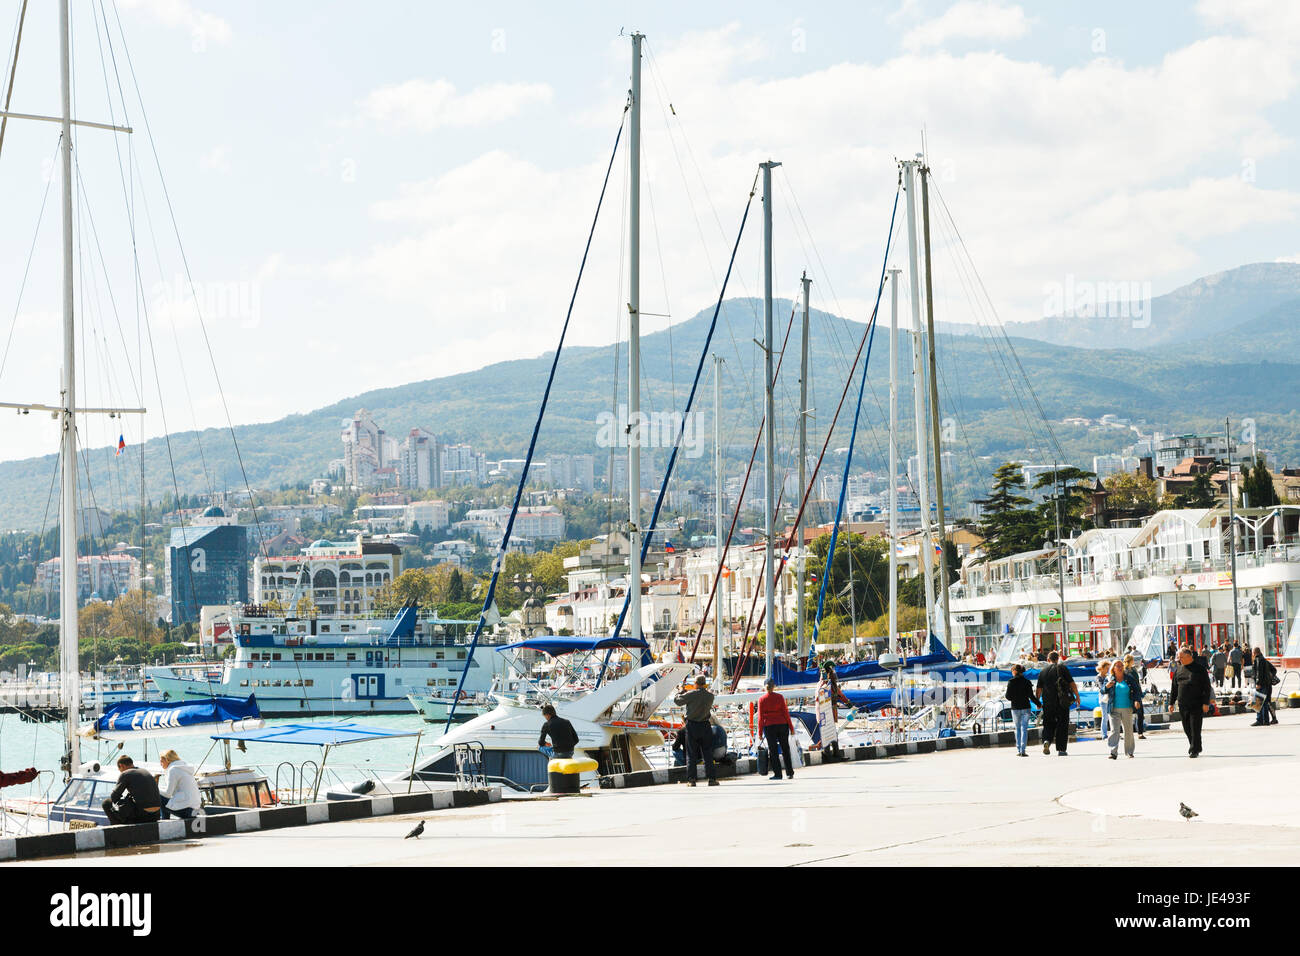 YALTA, RUSSIA - SEPTEMBER 28, 2014: people on waterfront in Yalta city in September . Yalta is resort city on the north coast of the Black Sea on the Crimean peninsula. Stock Photo